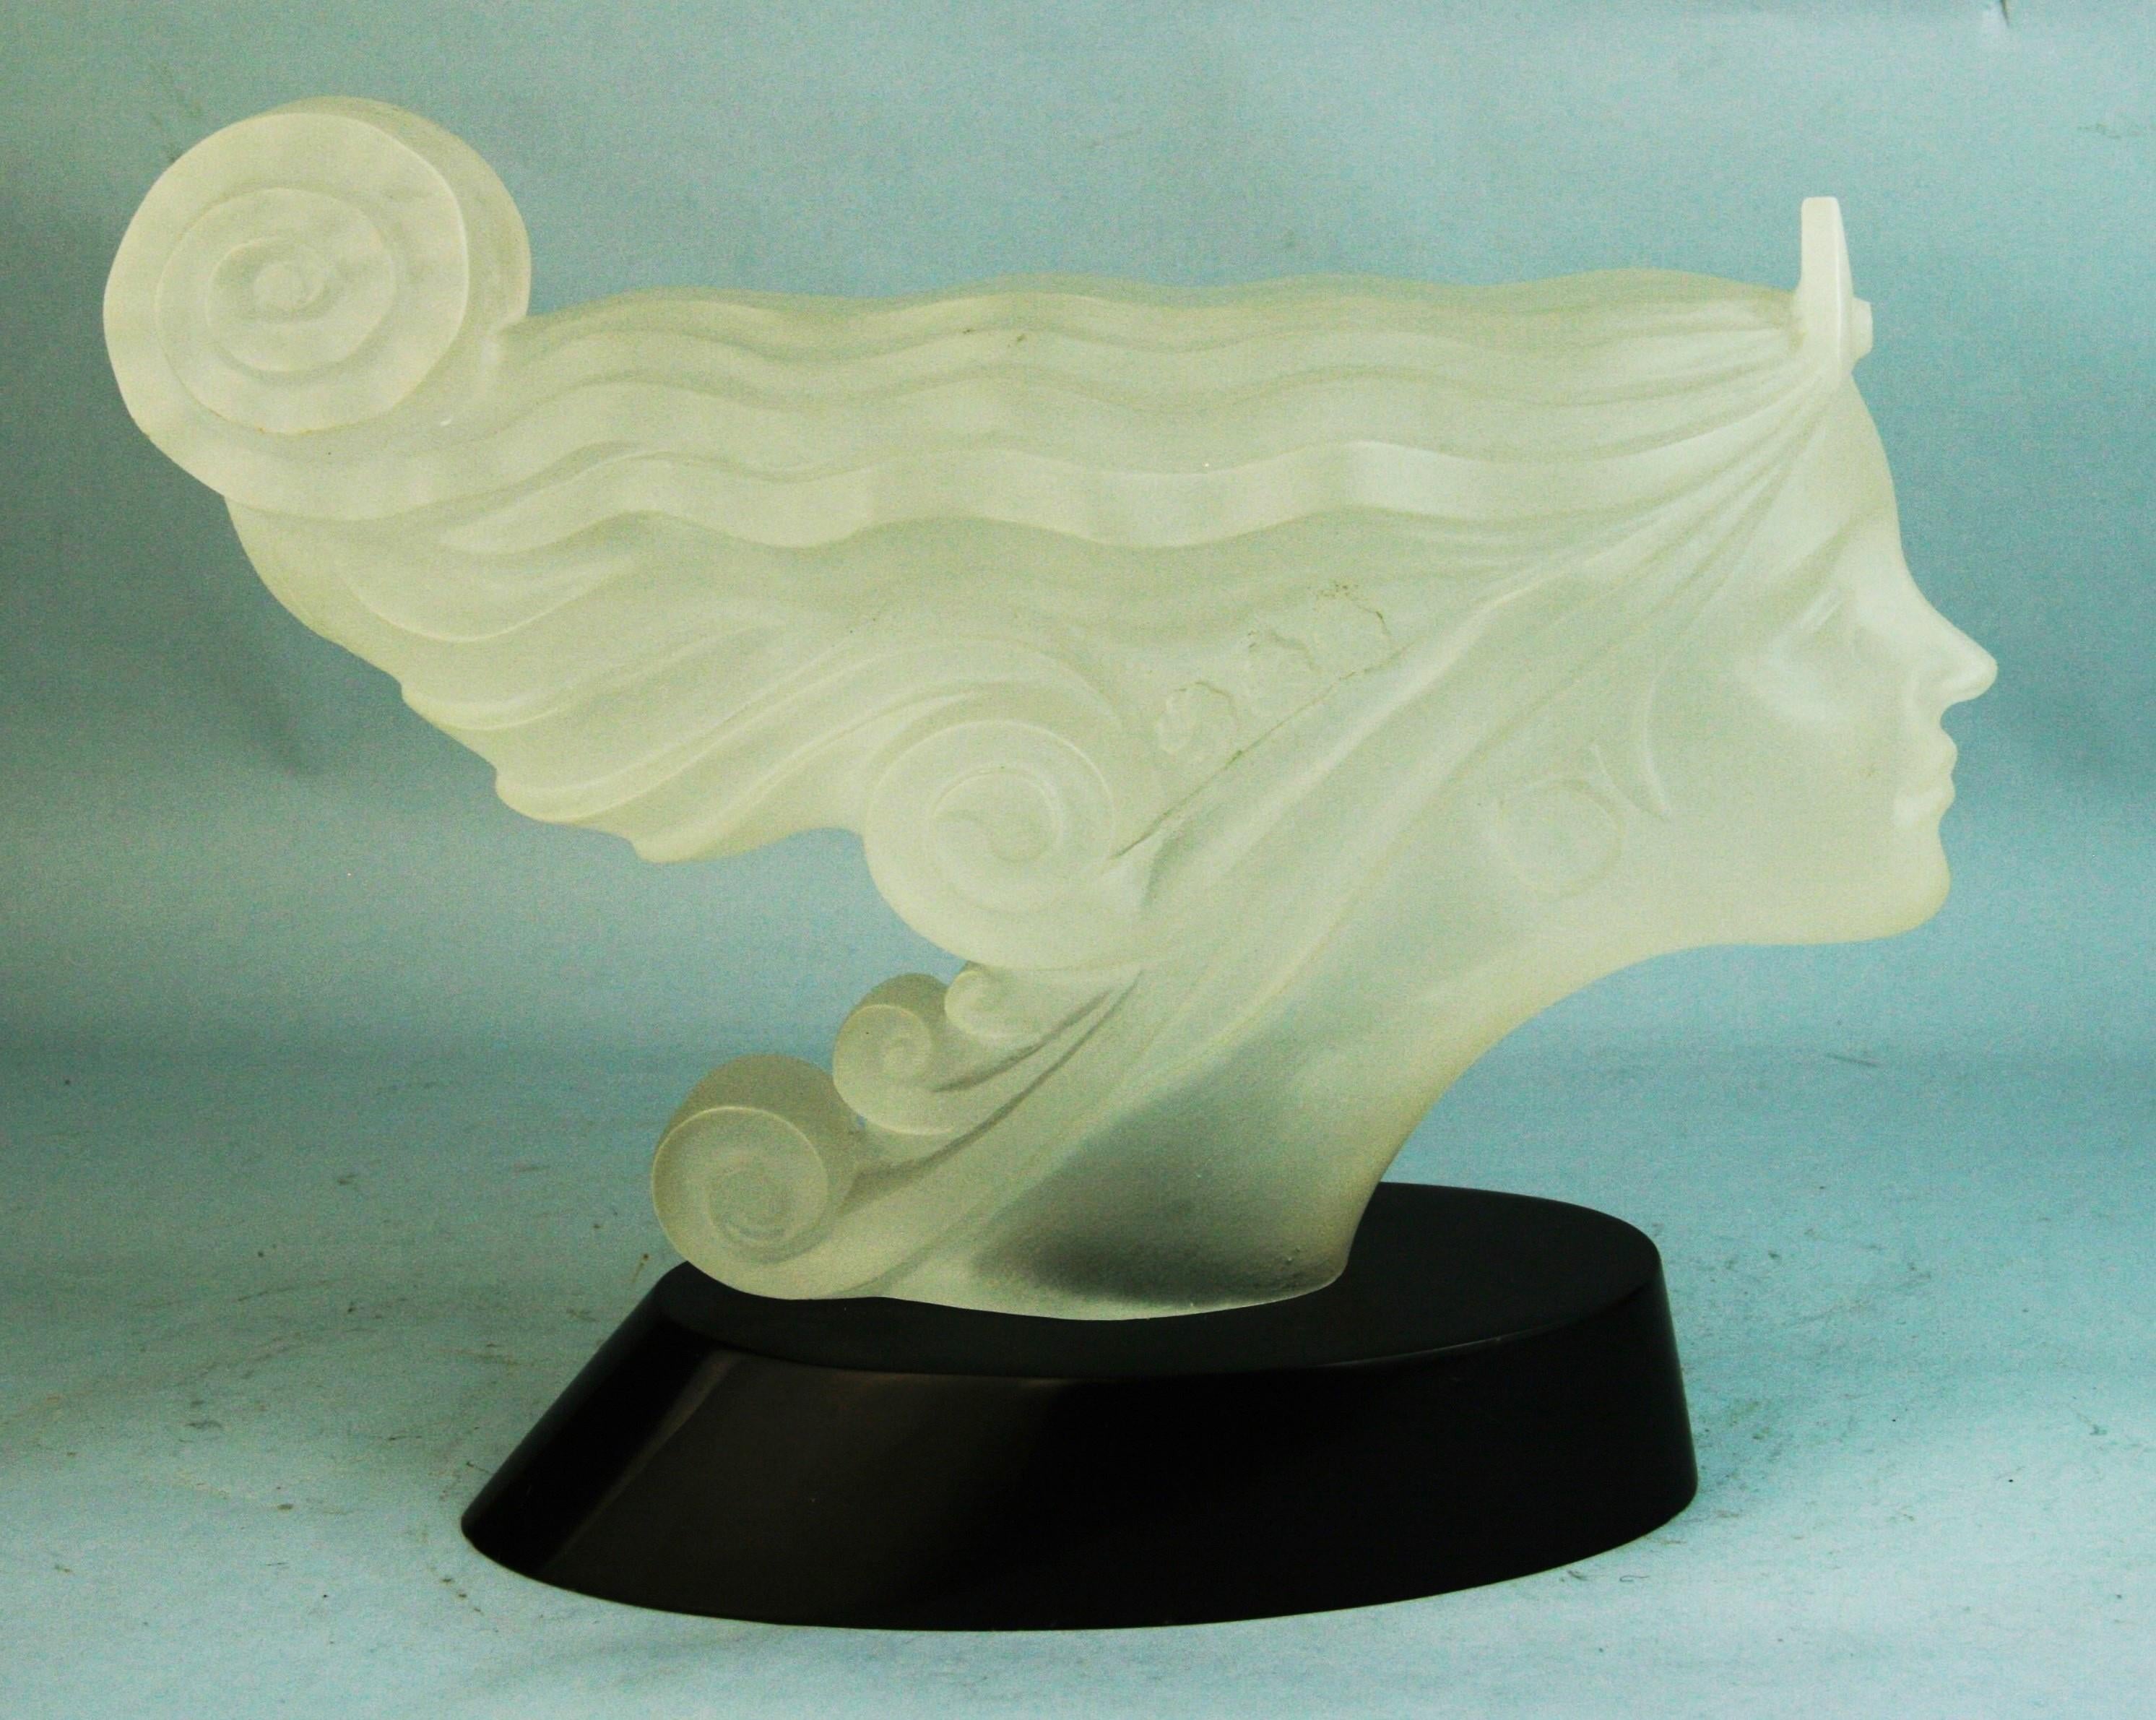 1215 Frosted acrylic casting of an Art Deco style car mascot hood ornament on a black acrylic base.